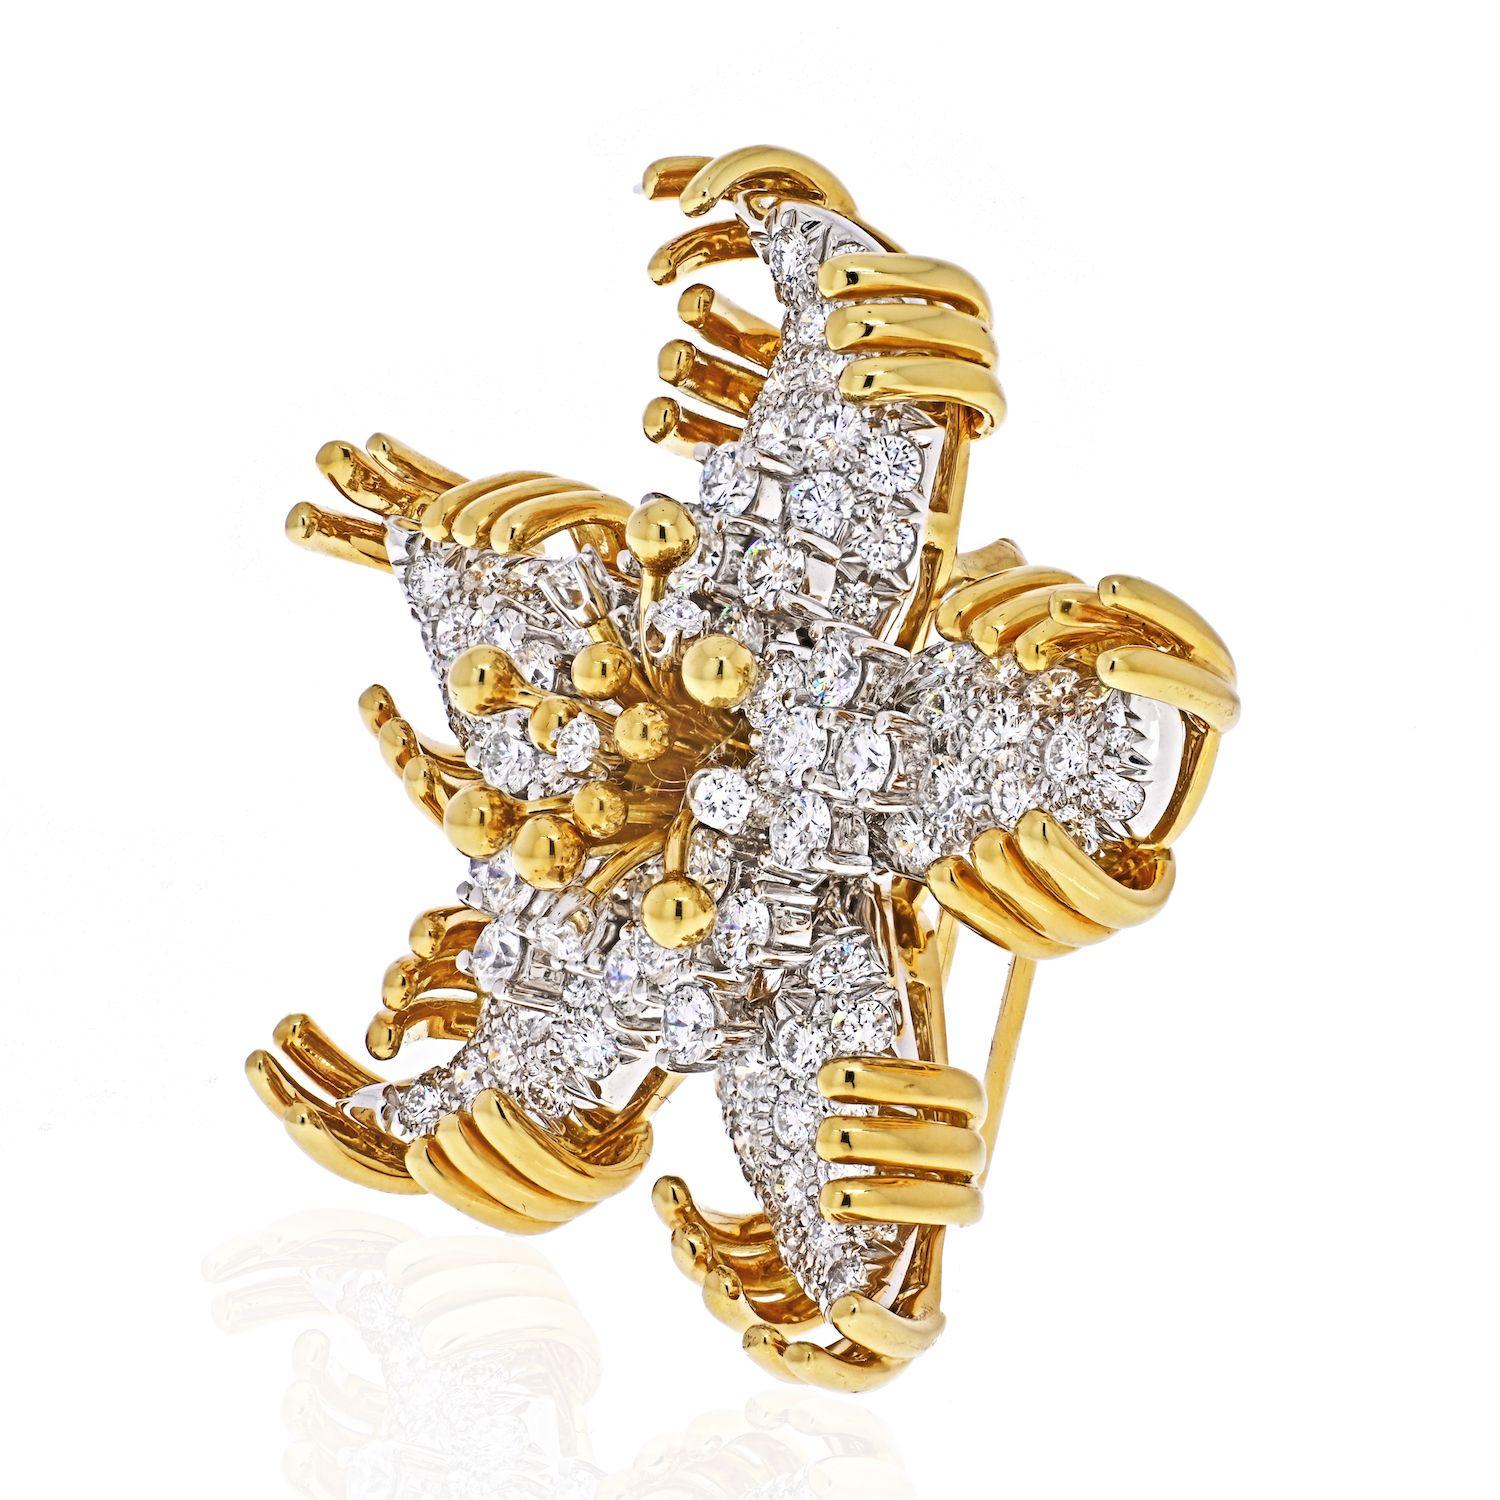 Fabolous Tiffany & Co. Schlumberger Platinum & 18K Yellow Gold Starfish Diamond Brooch.
Mounted with approximately 134 round diamonds weighing a total of approximately 7.50 - 8.50 carats.
Width: 4.2 x 4.8 cm
